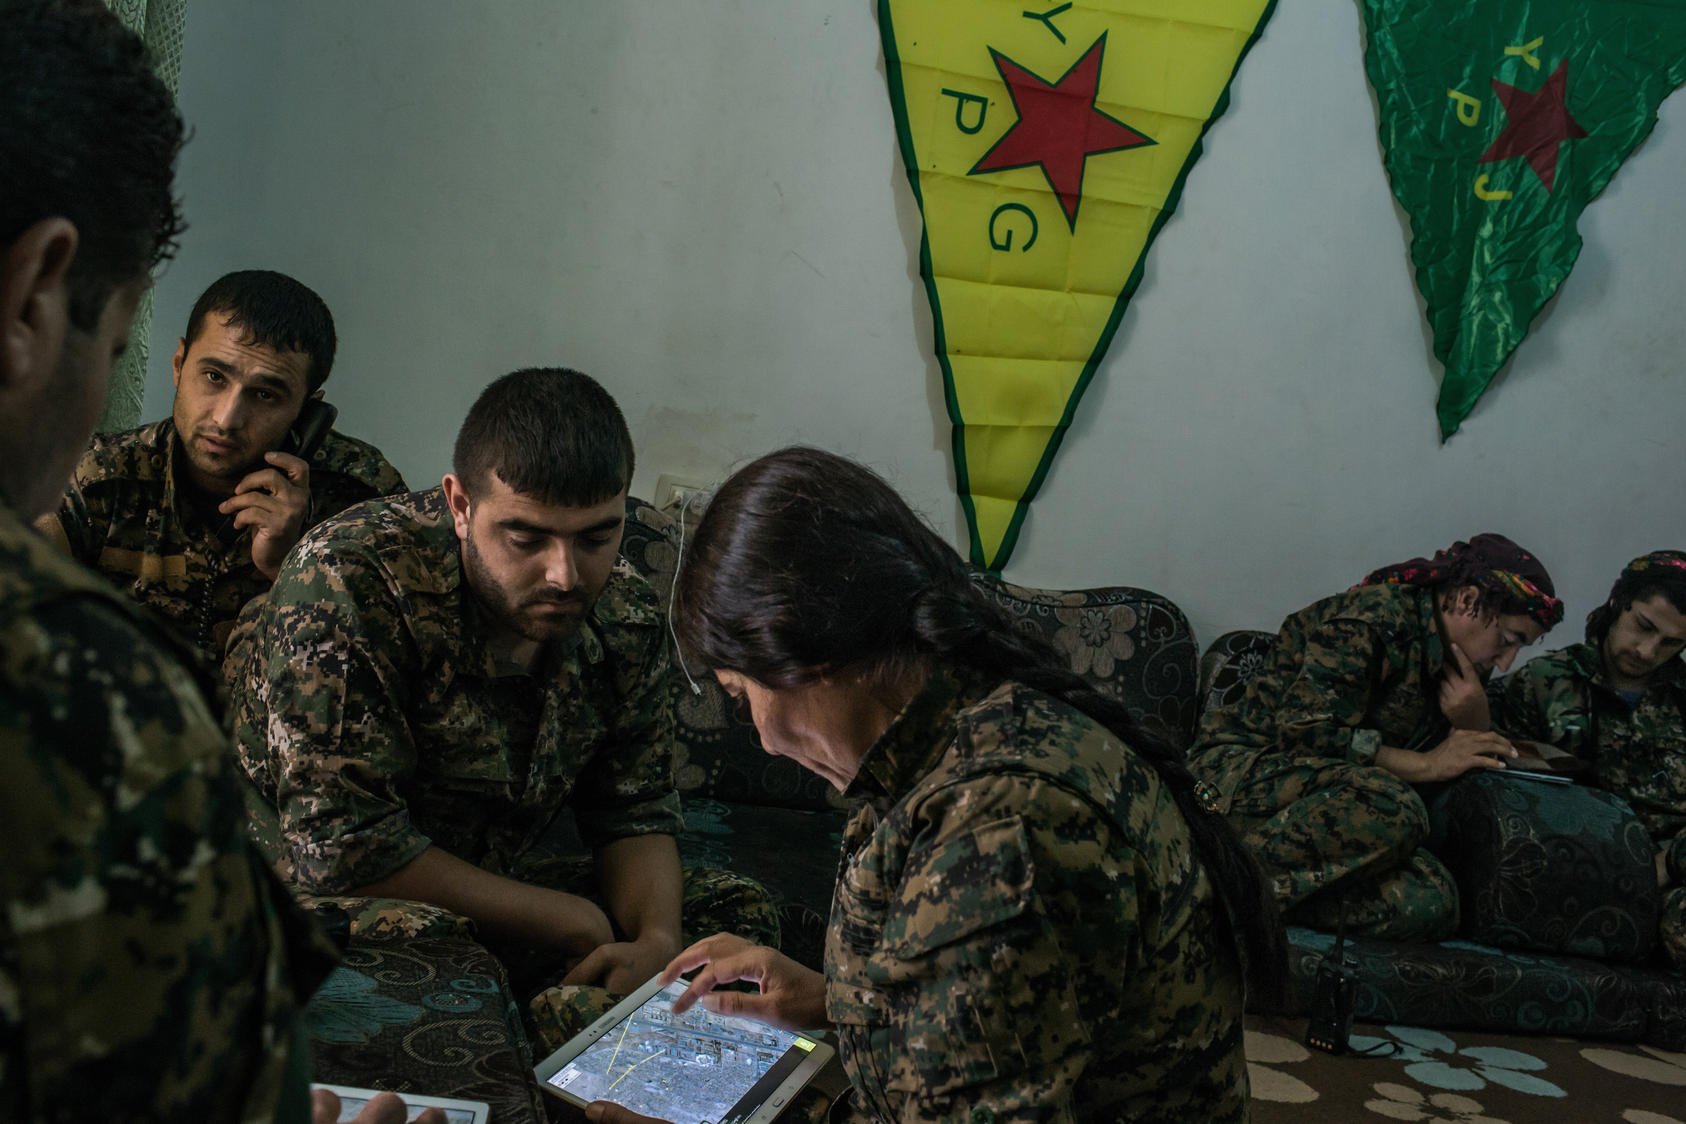 Kurdish Y.P.G. fighters inspect maps and check locations as they coordinate an airstrike with the U.S. against an ISIS position, Hasaka, Syria, July 31, 2015. The Y.P.G. has been one of the few groups to constantly and effectively battle ISIS in Syria. (Mauricio Lima/The New York Times)